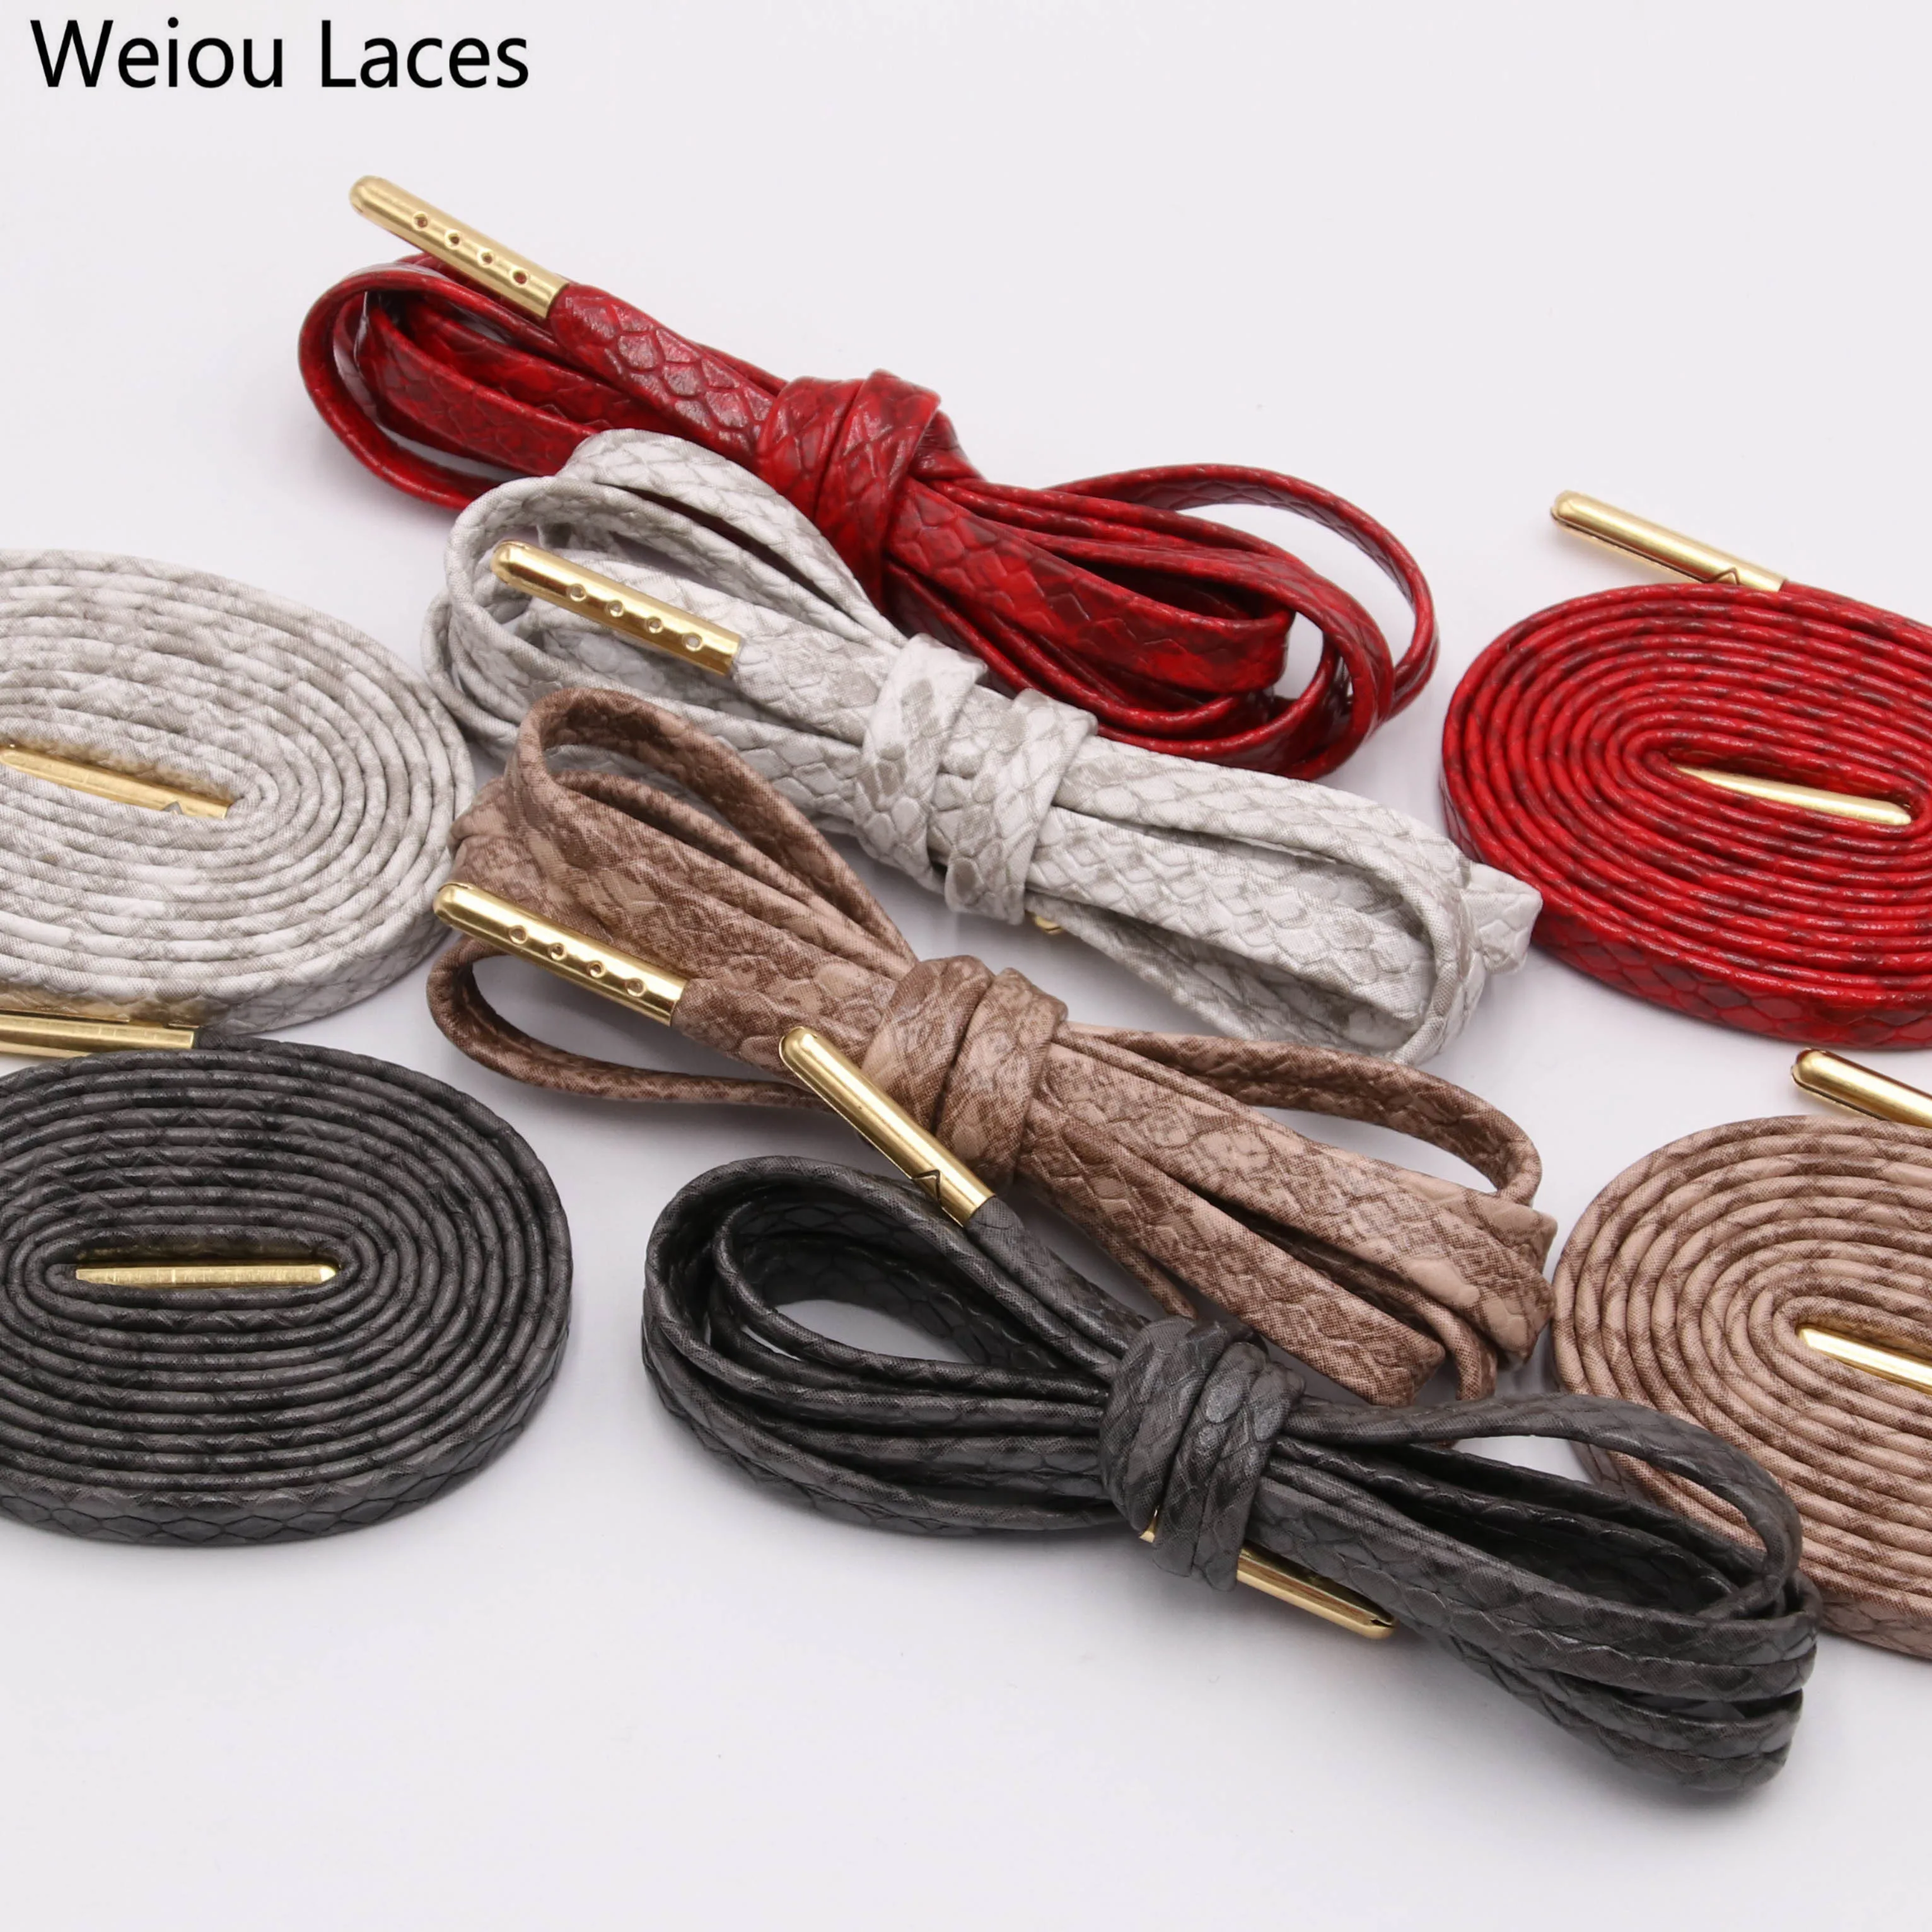 Weiou High-end Luxury Sheepskin Soft Leather Flat Bootlaces